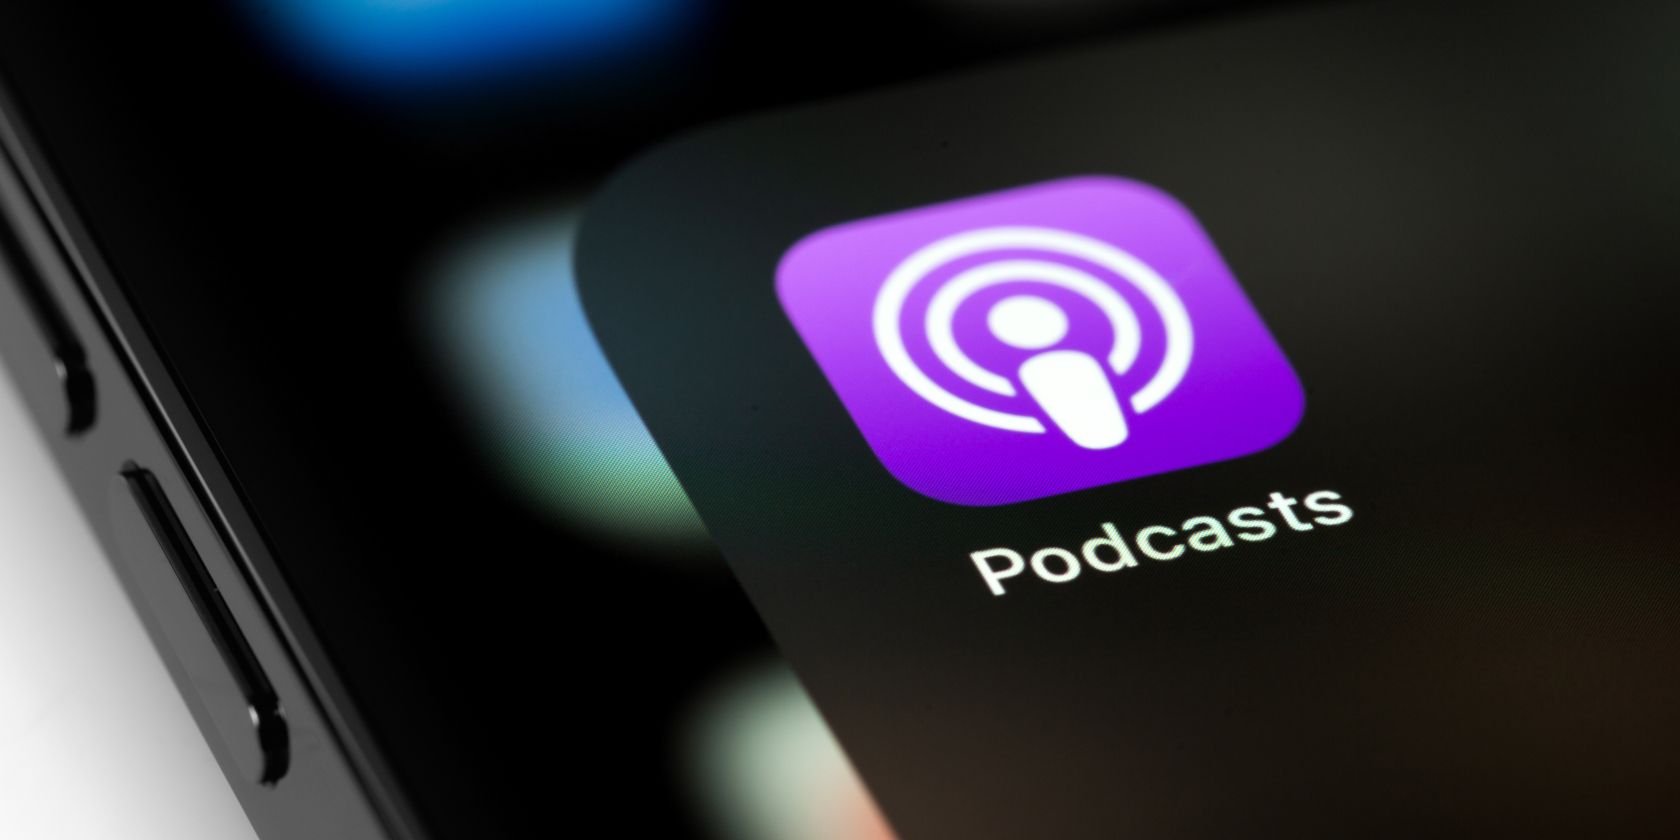 How to Use Apple Podcasts' Personalized Recommendations to Find Podcasts You'll Like